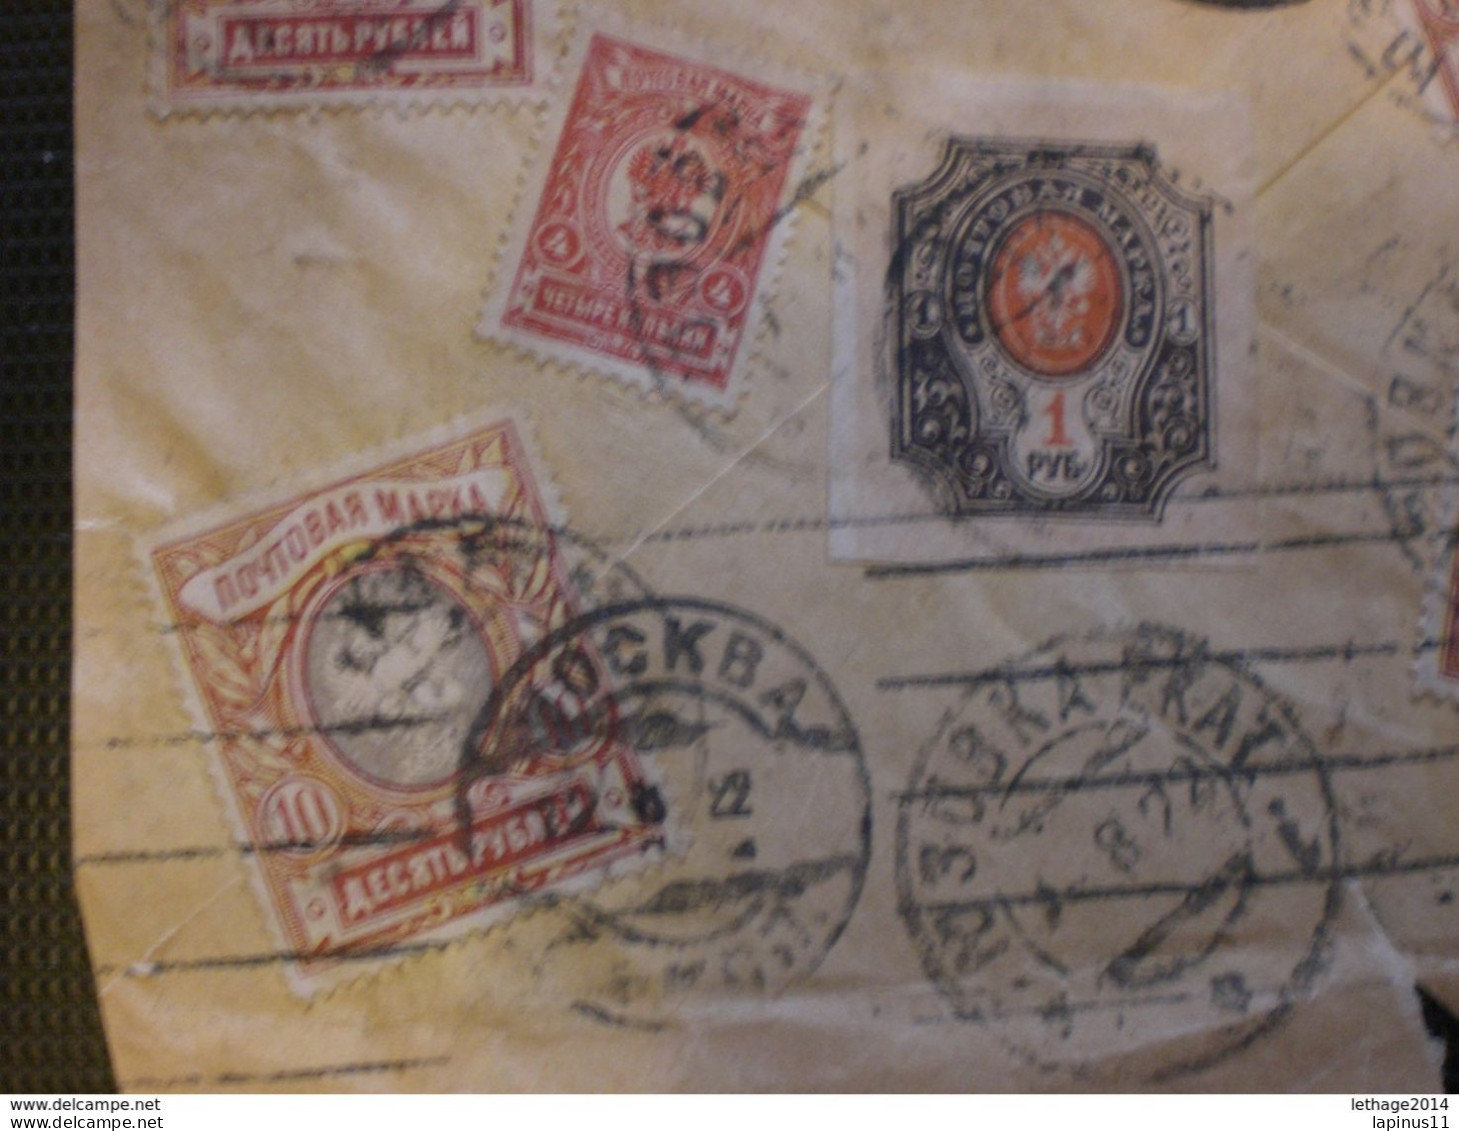 RUSSIA RUSSIE РОССИЯ STAMPS COVER 1922 REGISTER MAIL RUSSIA TO ITALY OVER STAMPS FULL RRR RIF.TAGG. (127) - Cartas & Documentos